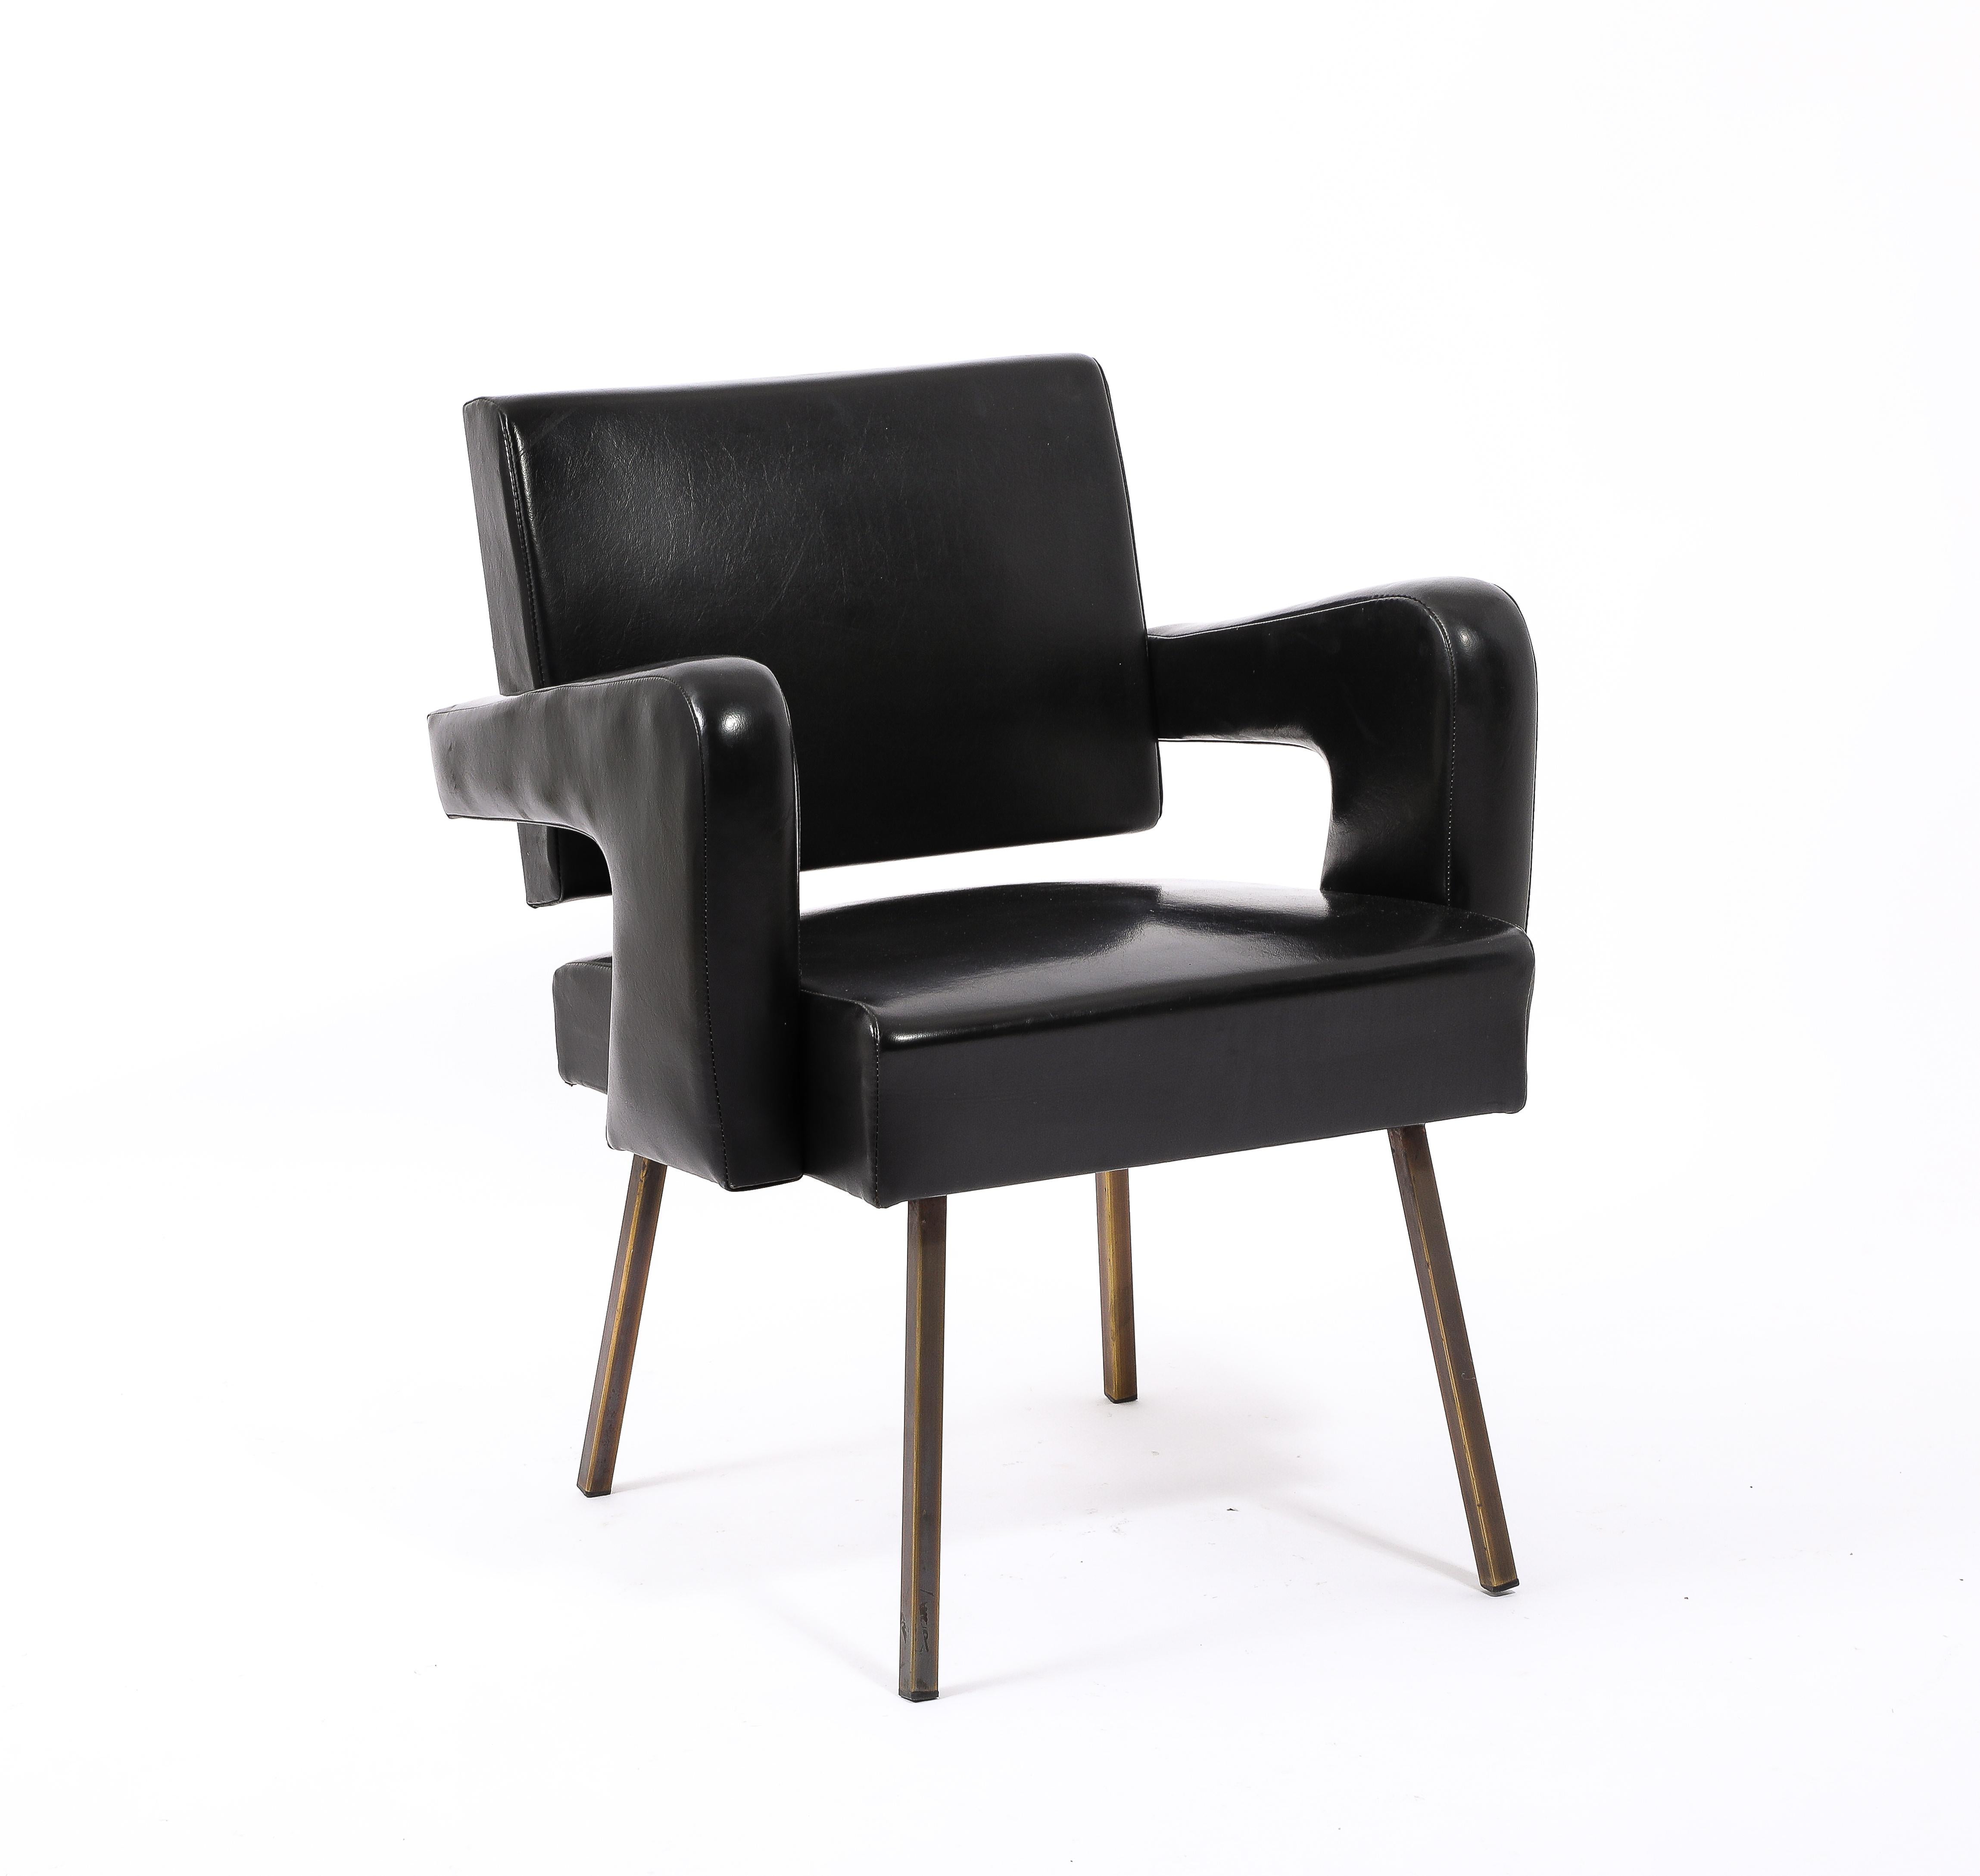 Jacques Adnet Black Vinyl & Brass Armchairs, France 1950's For Sale 3